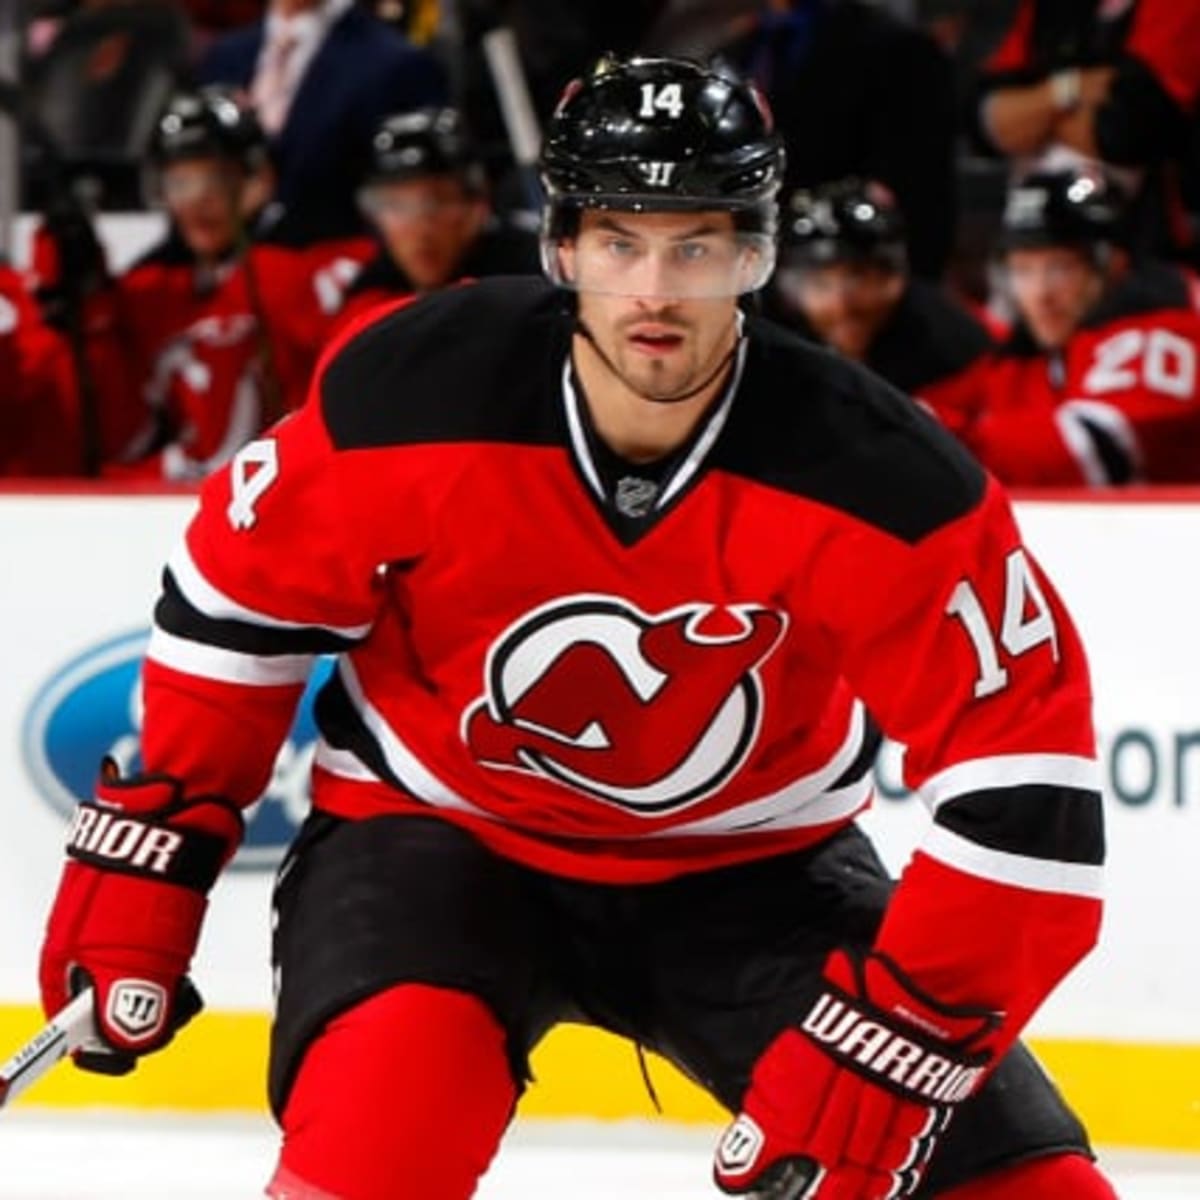 Adam Henrique Hockey Stats and Profile at